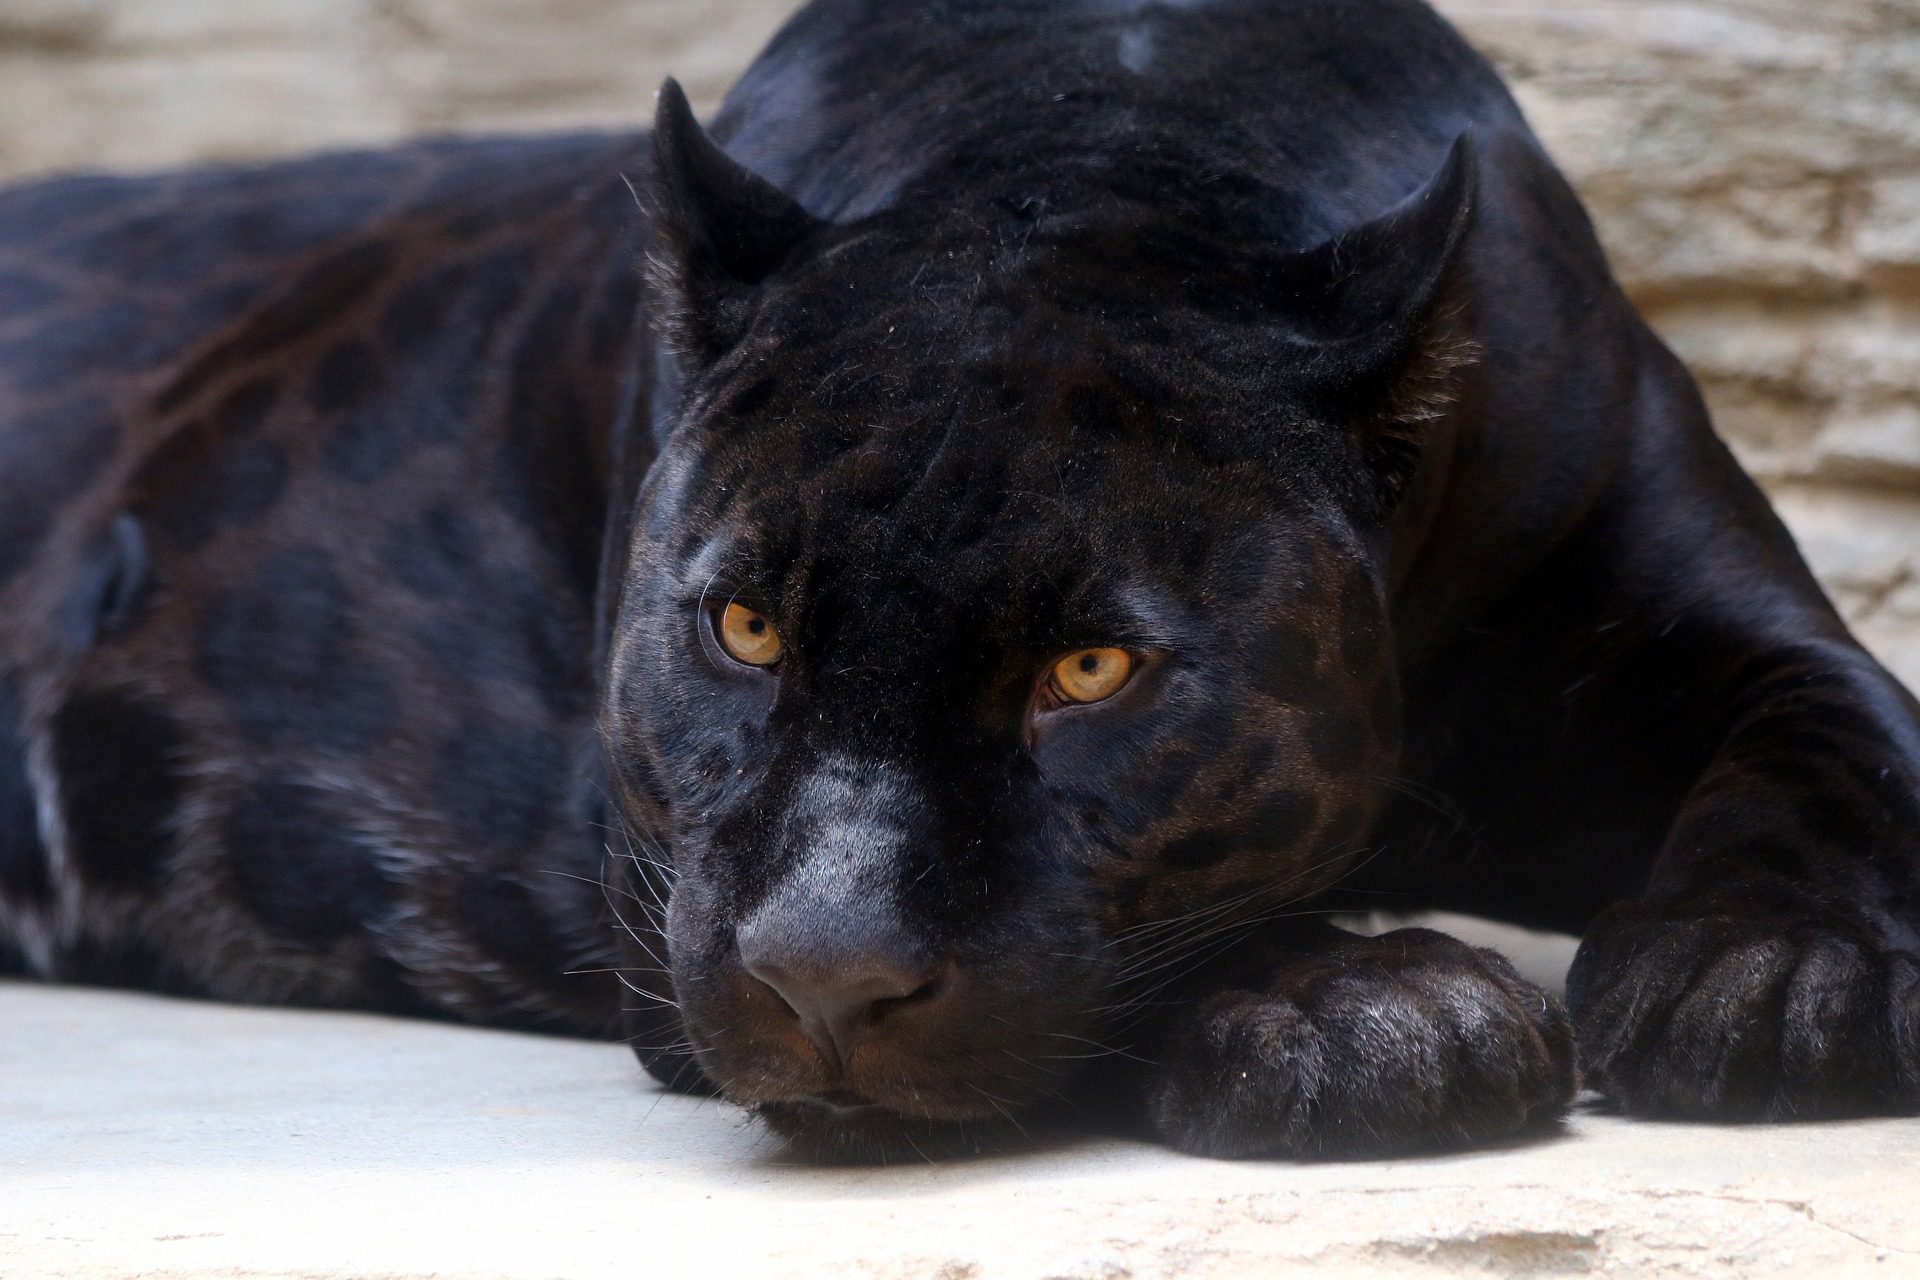 A Black panther